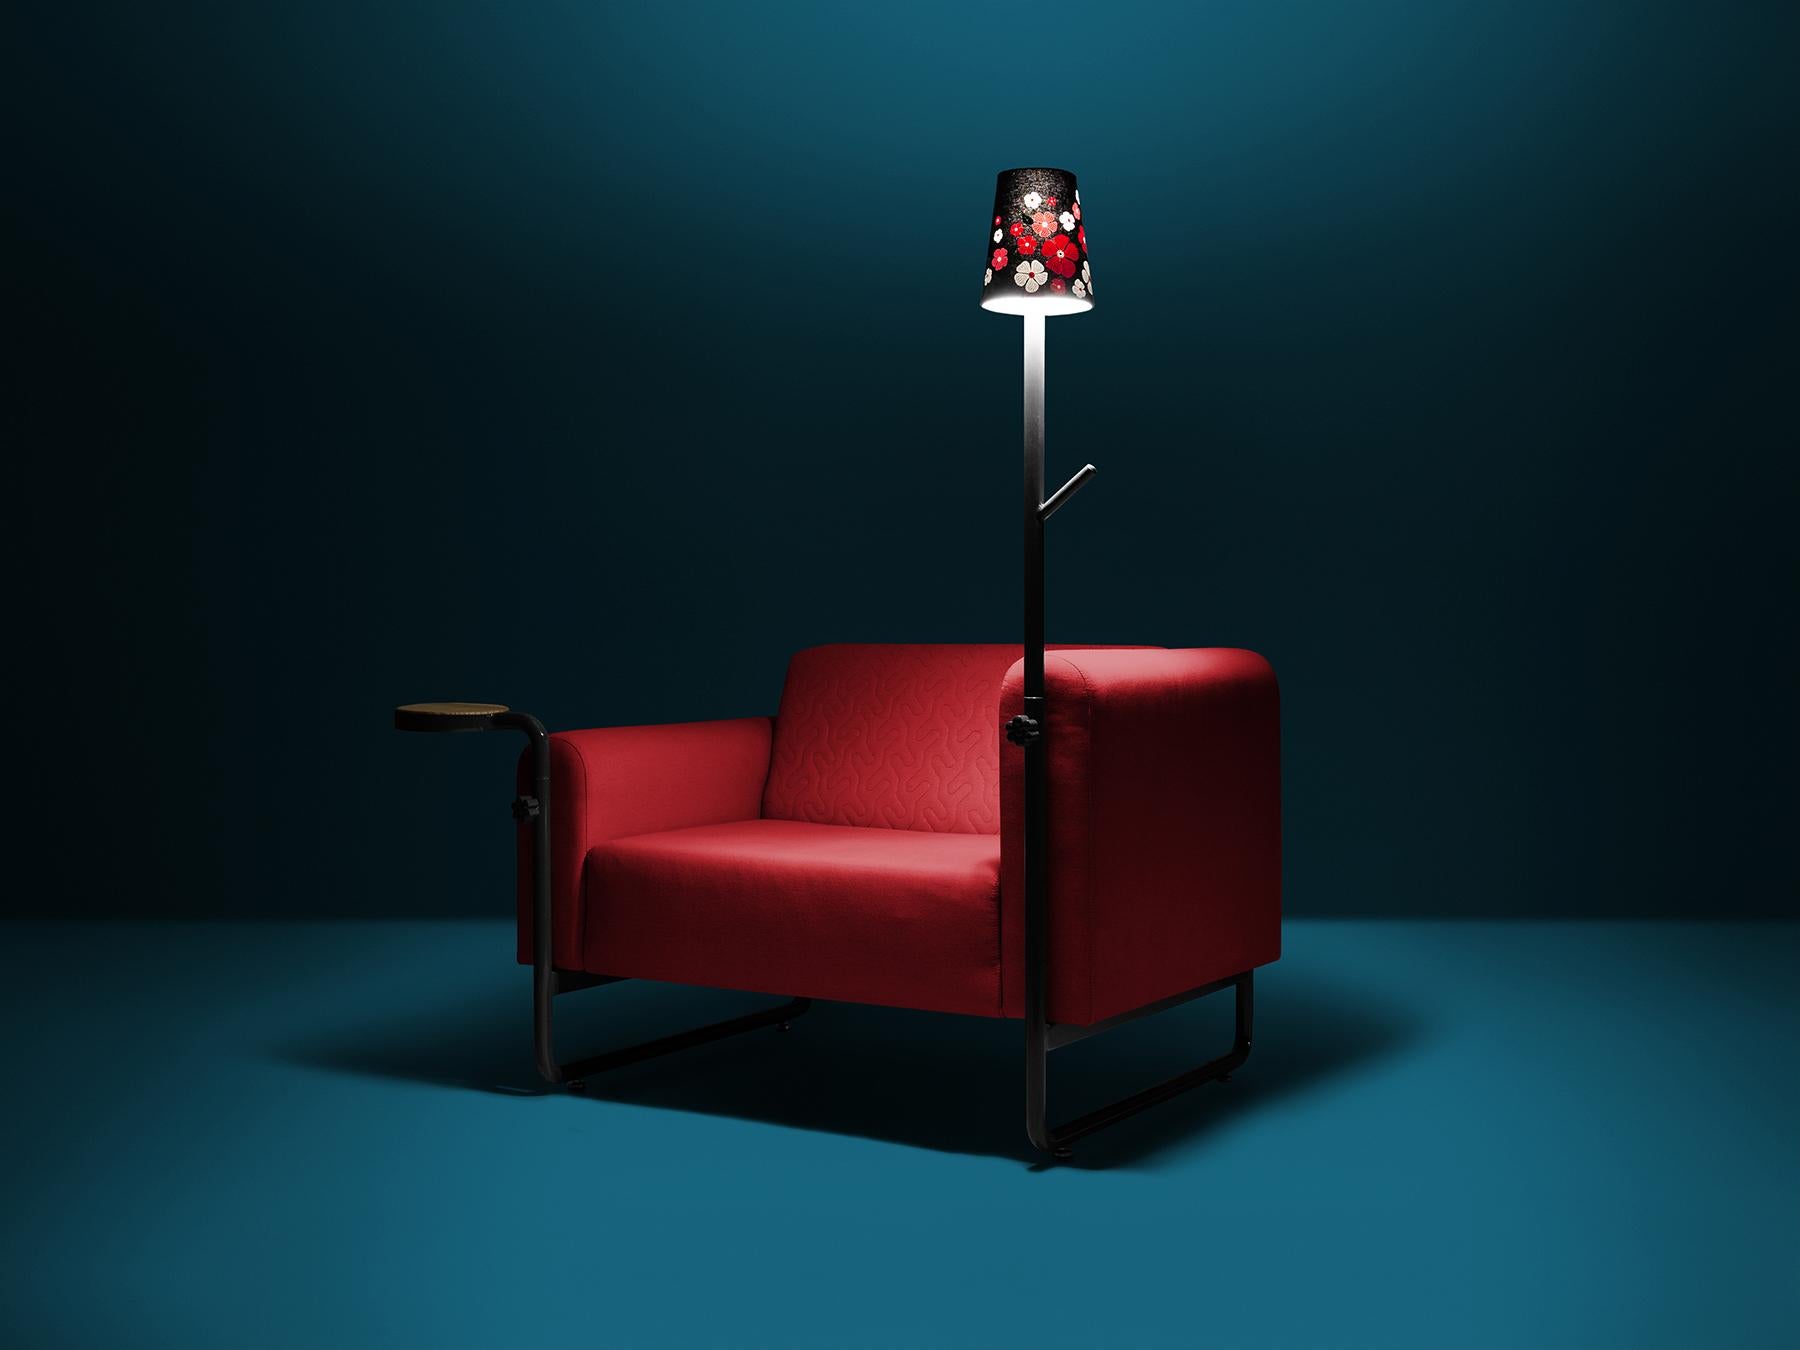 Fabric Red PK8 Armchair, Seat & Lamp Hybrid, Handmade Metal Structure by Paulo Kobylka For Sale